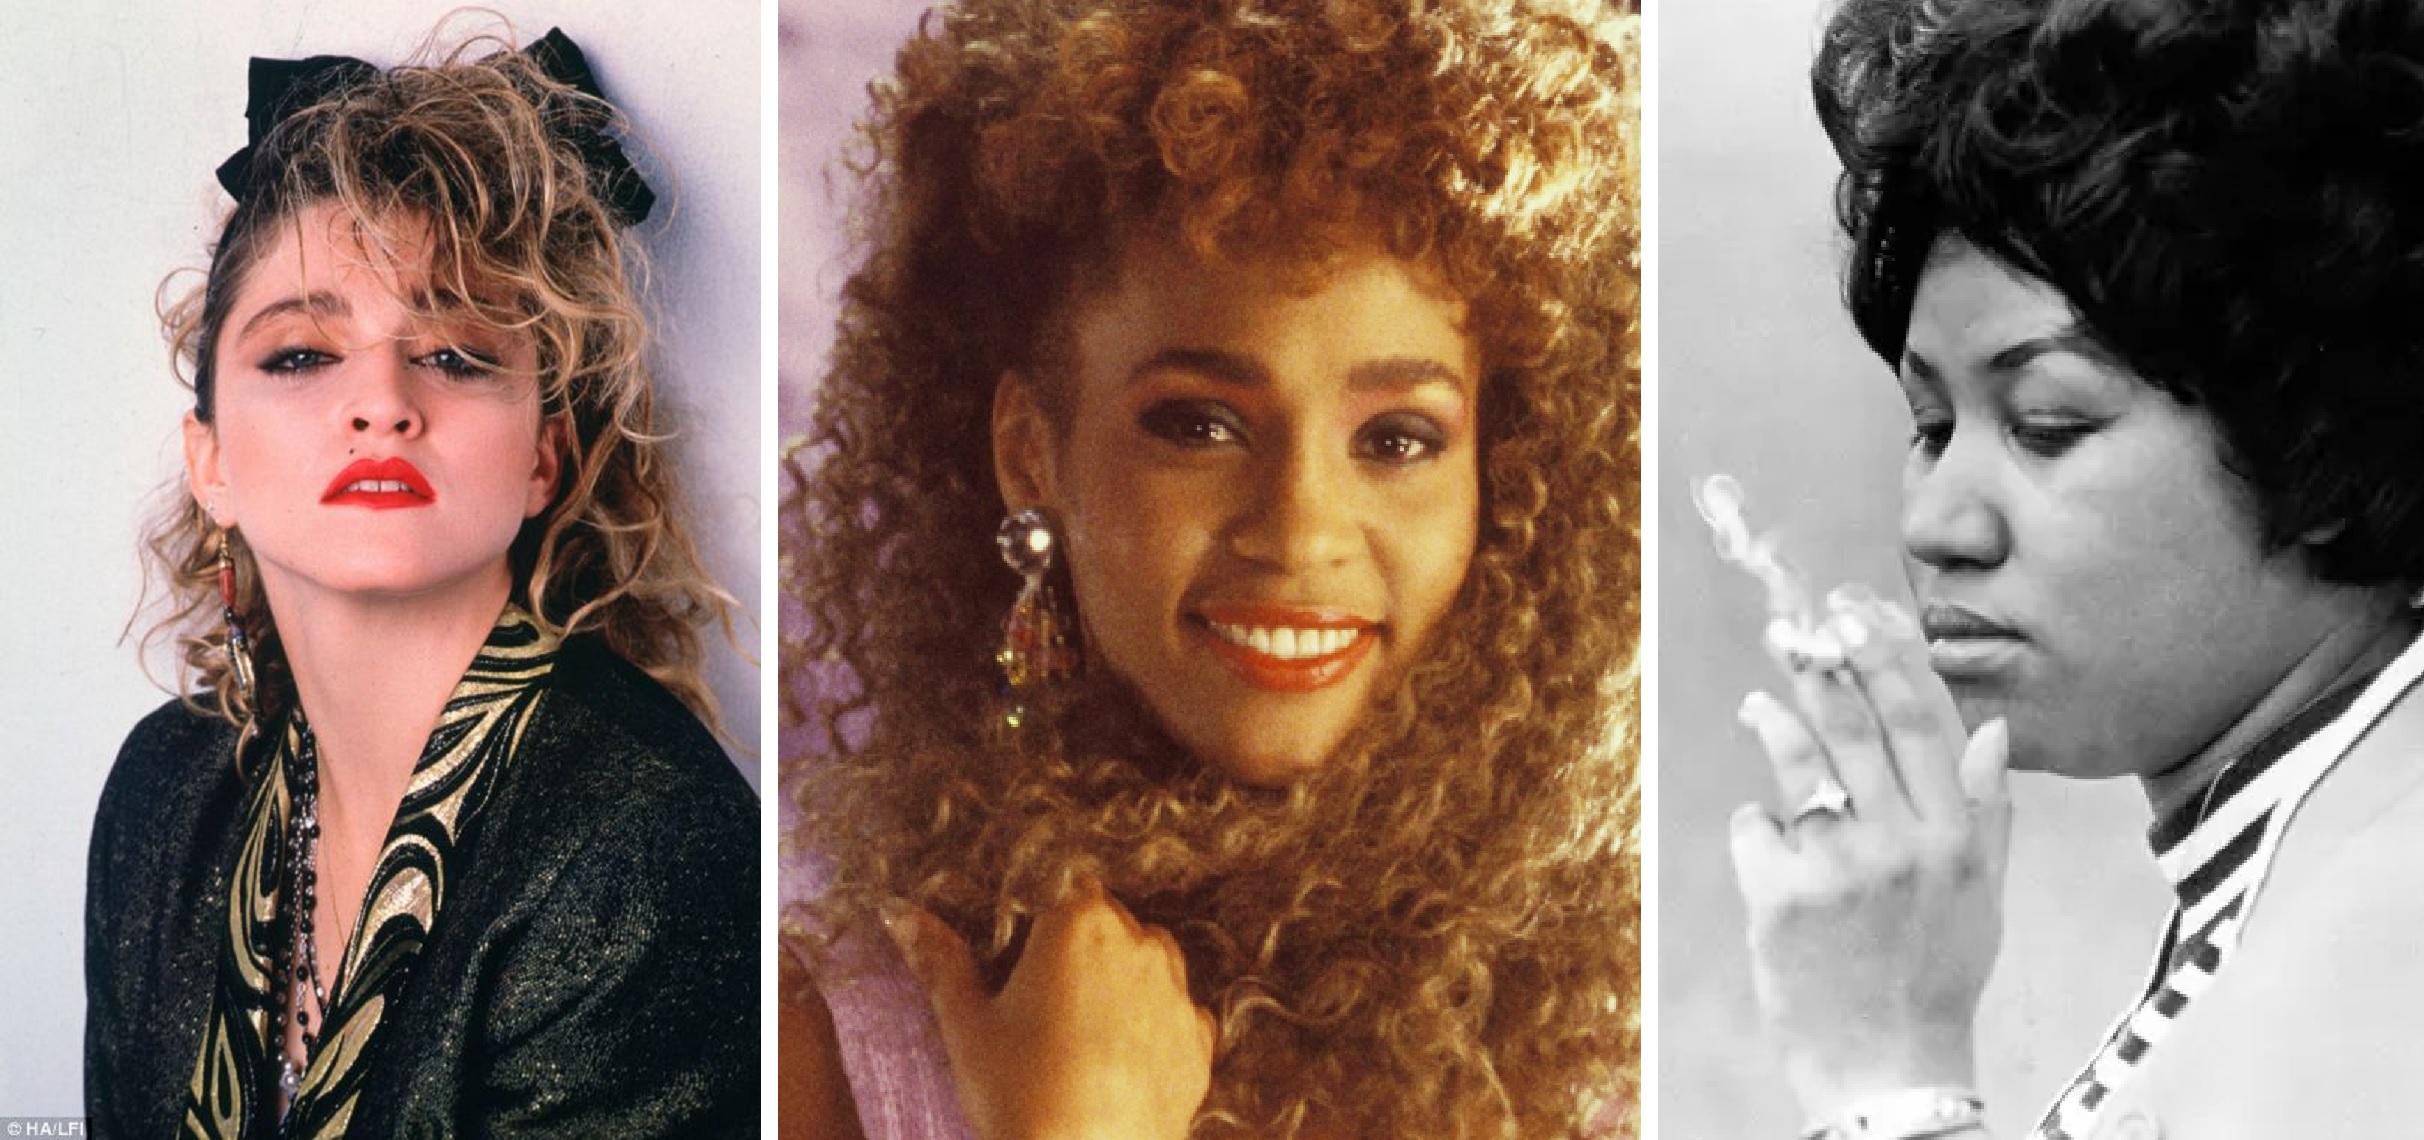 Top 10 Most Influential Female Singers Who Helped Shape Modern Music As We Know It